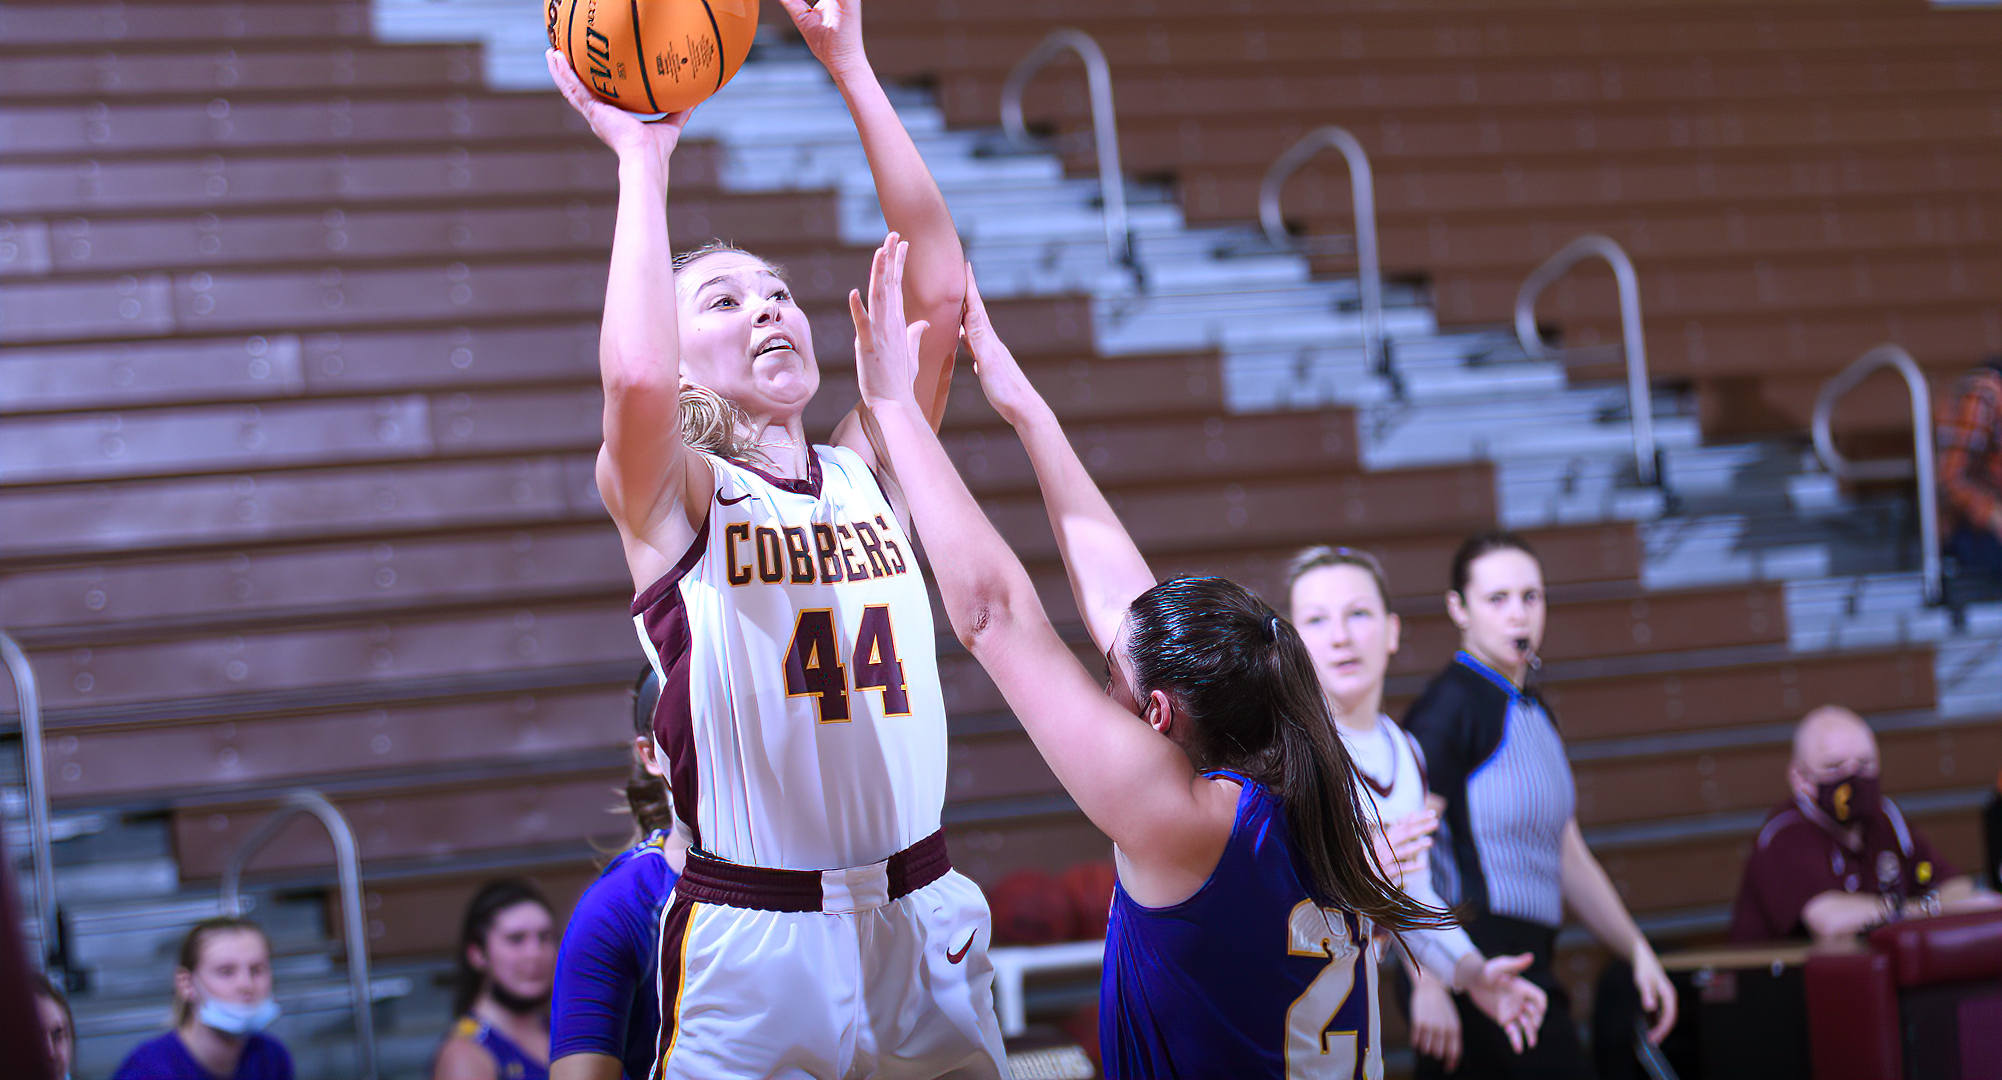 Freshman Symone Beld goes up for a shot on her way to a game-high 16 points in the Cobbers' 76-47 win against St. Scholastica.